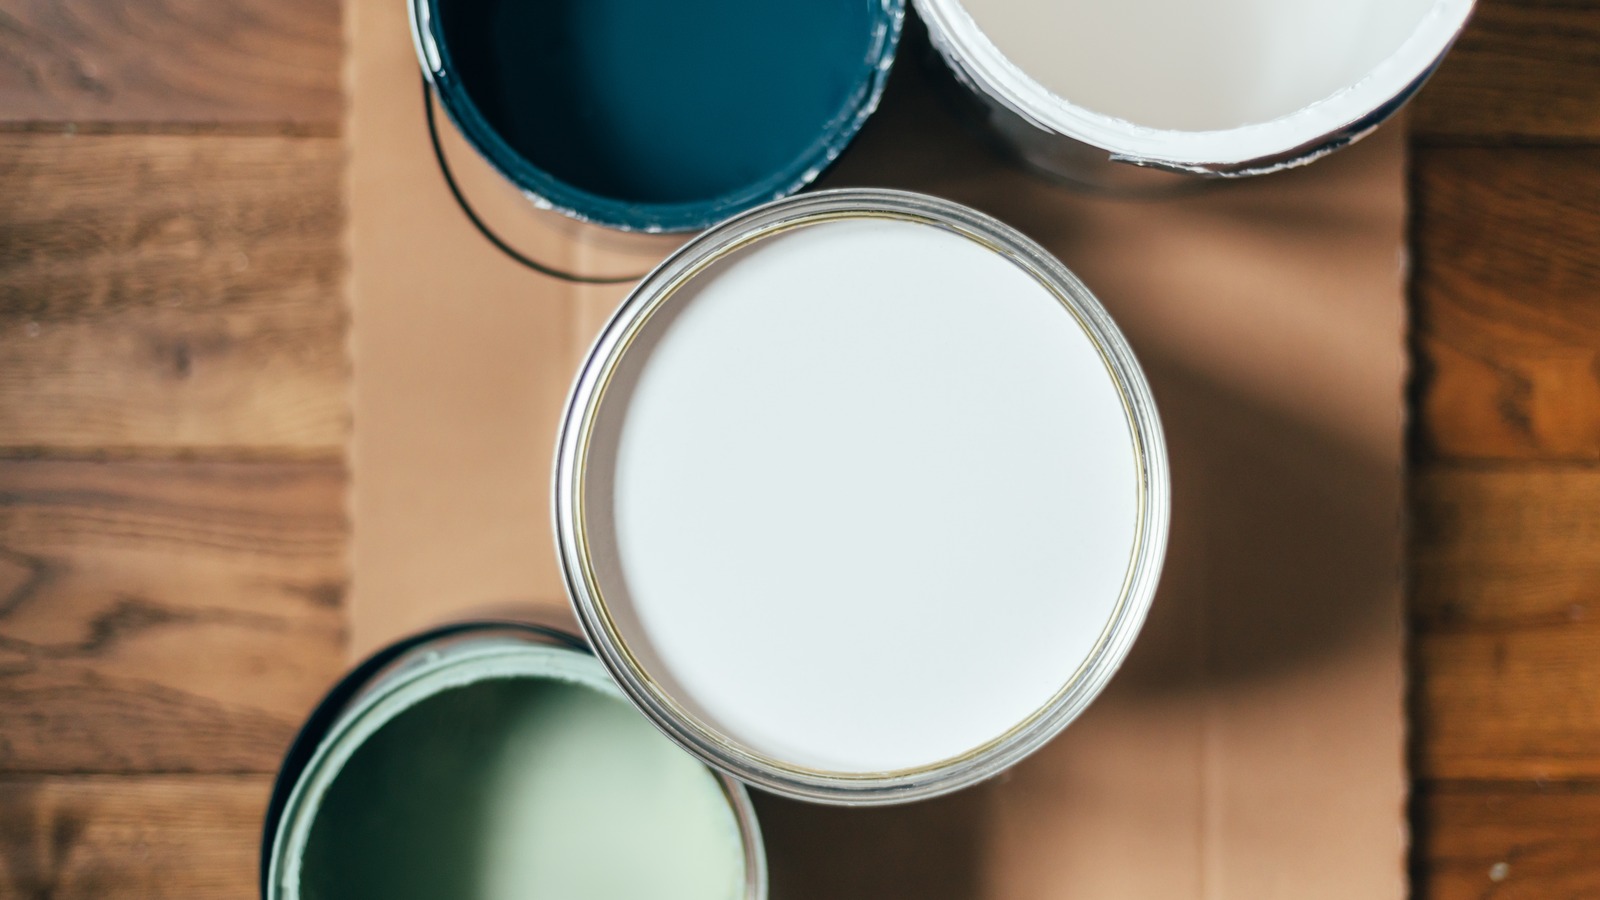 Valspar Best White Colors: From Cool Tones to Warmer White